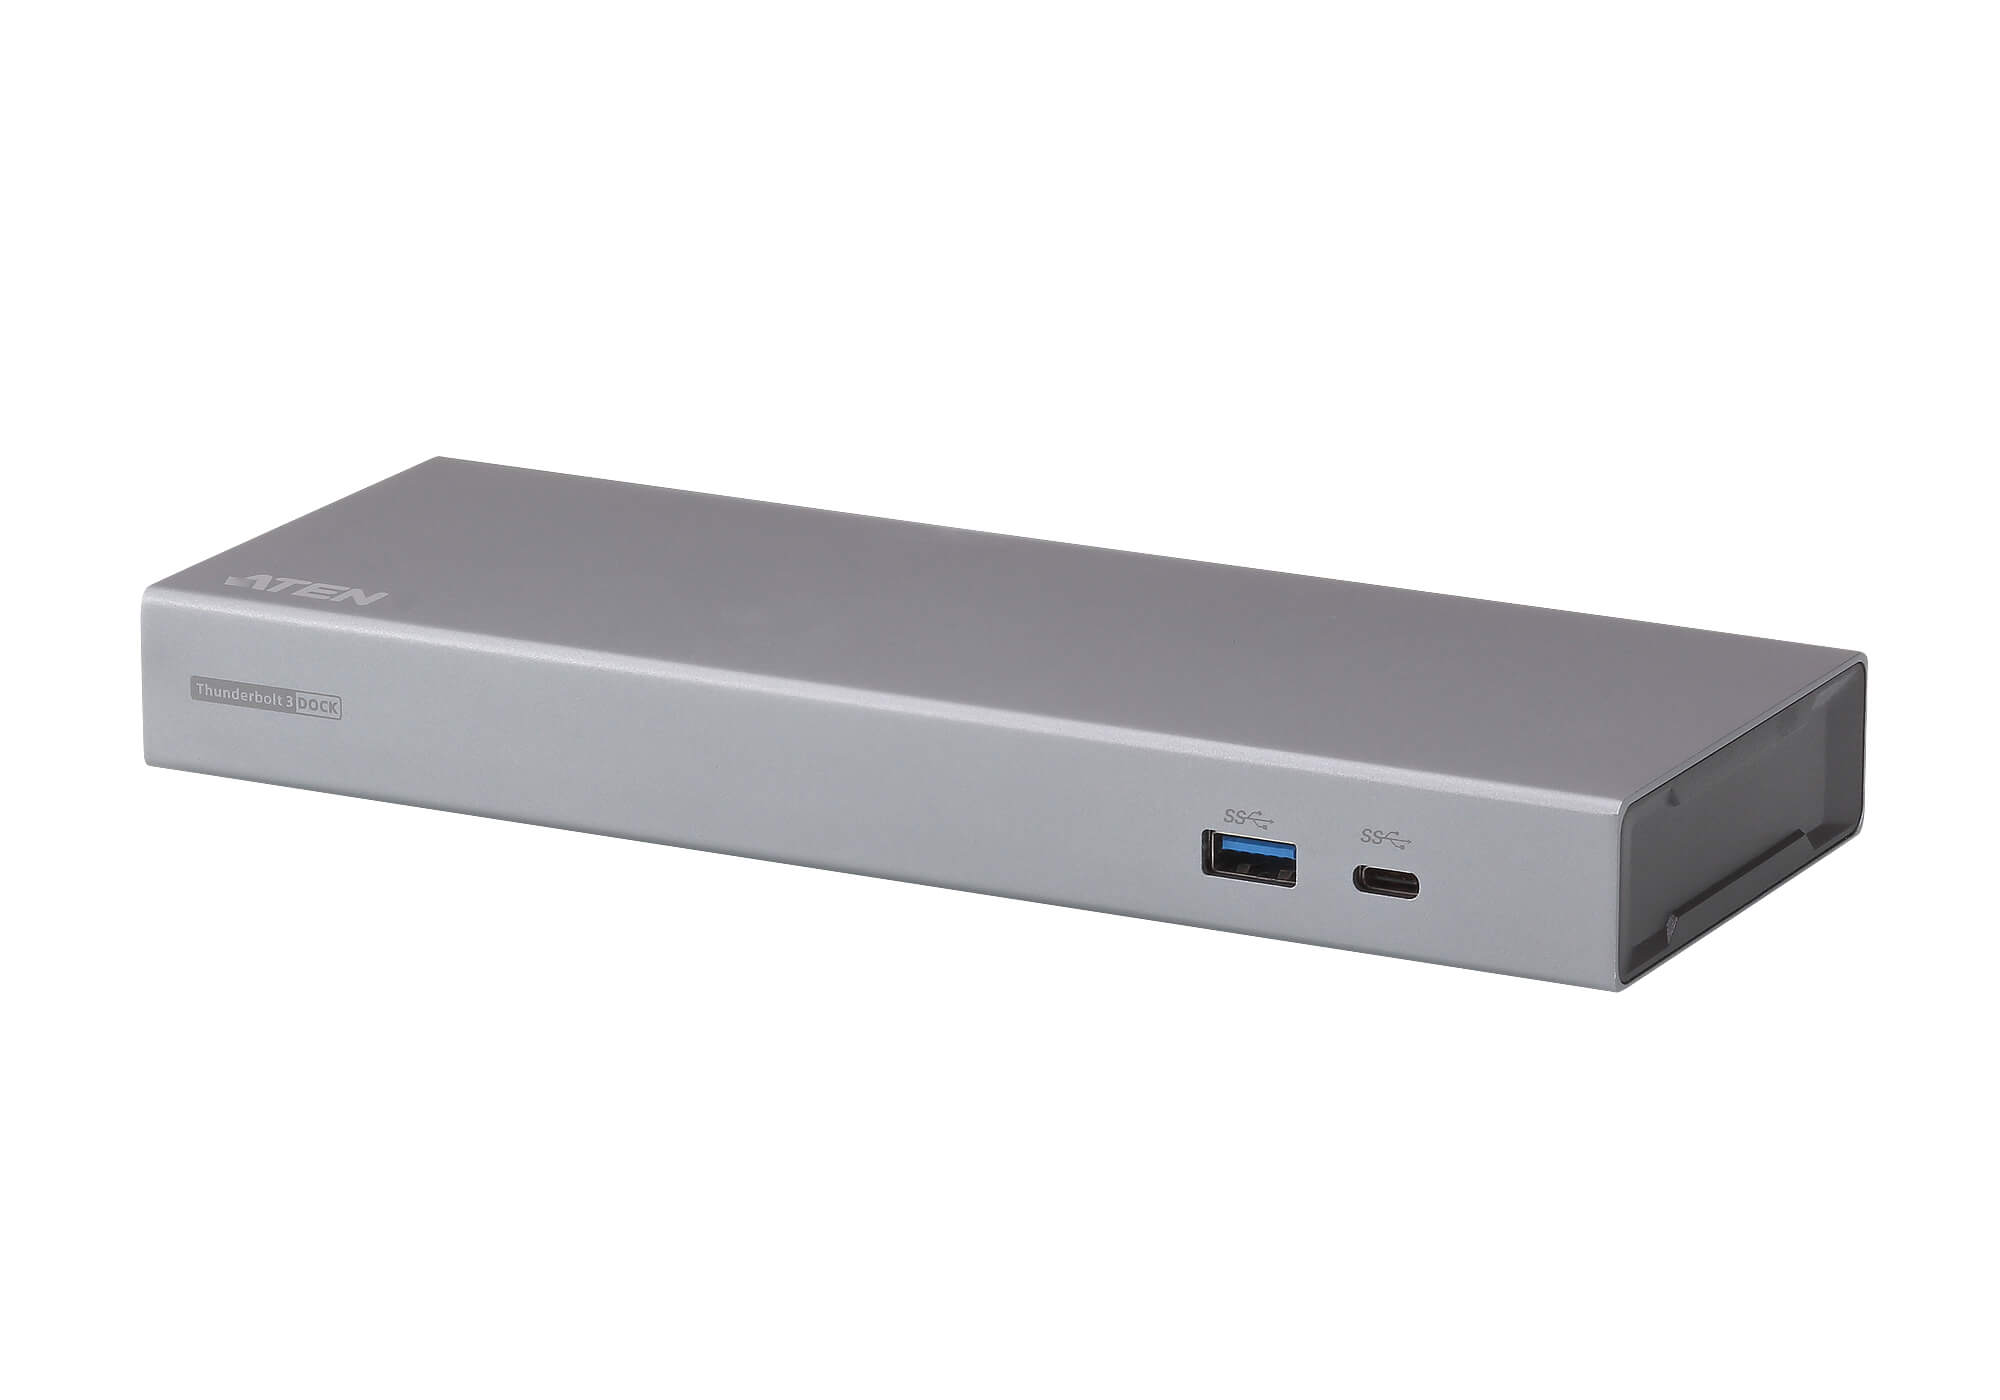 Aten Thunderbolt 3 Multiport Dock with power Charging